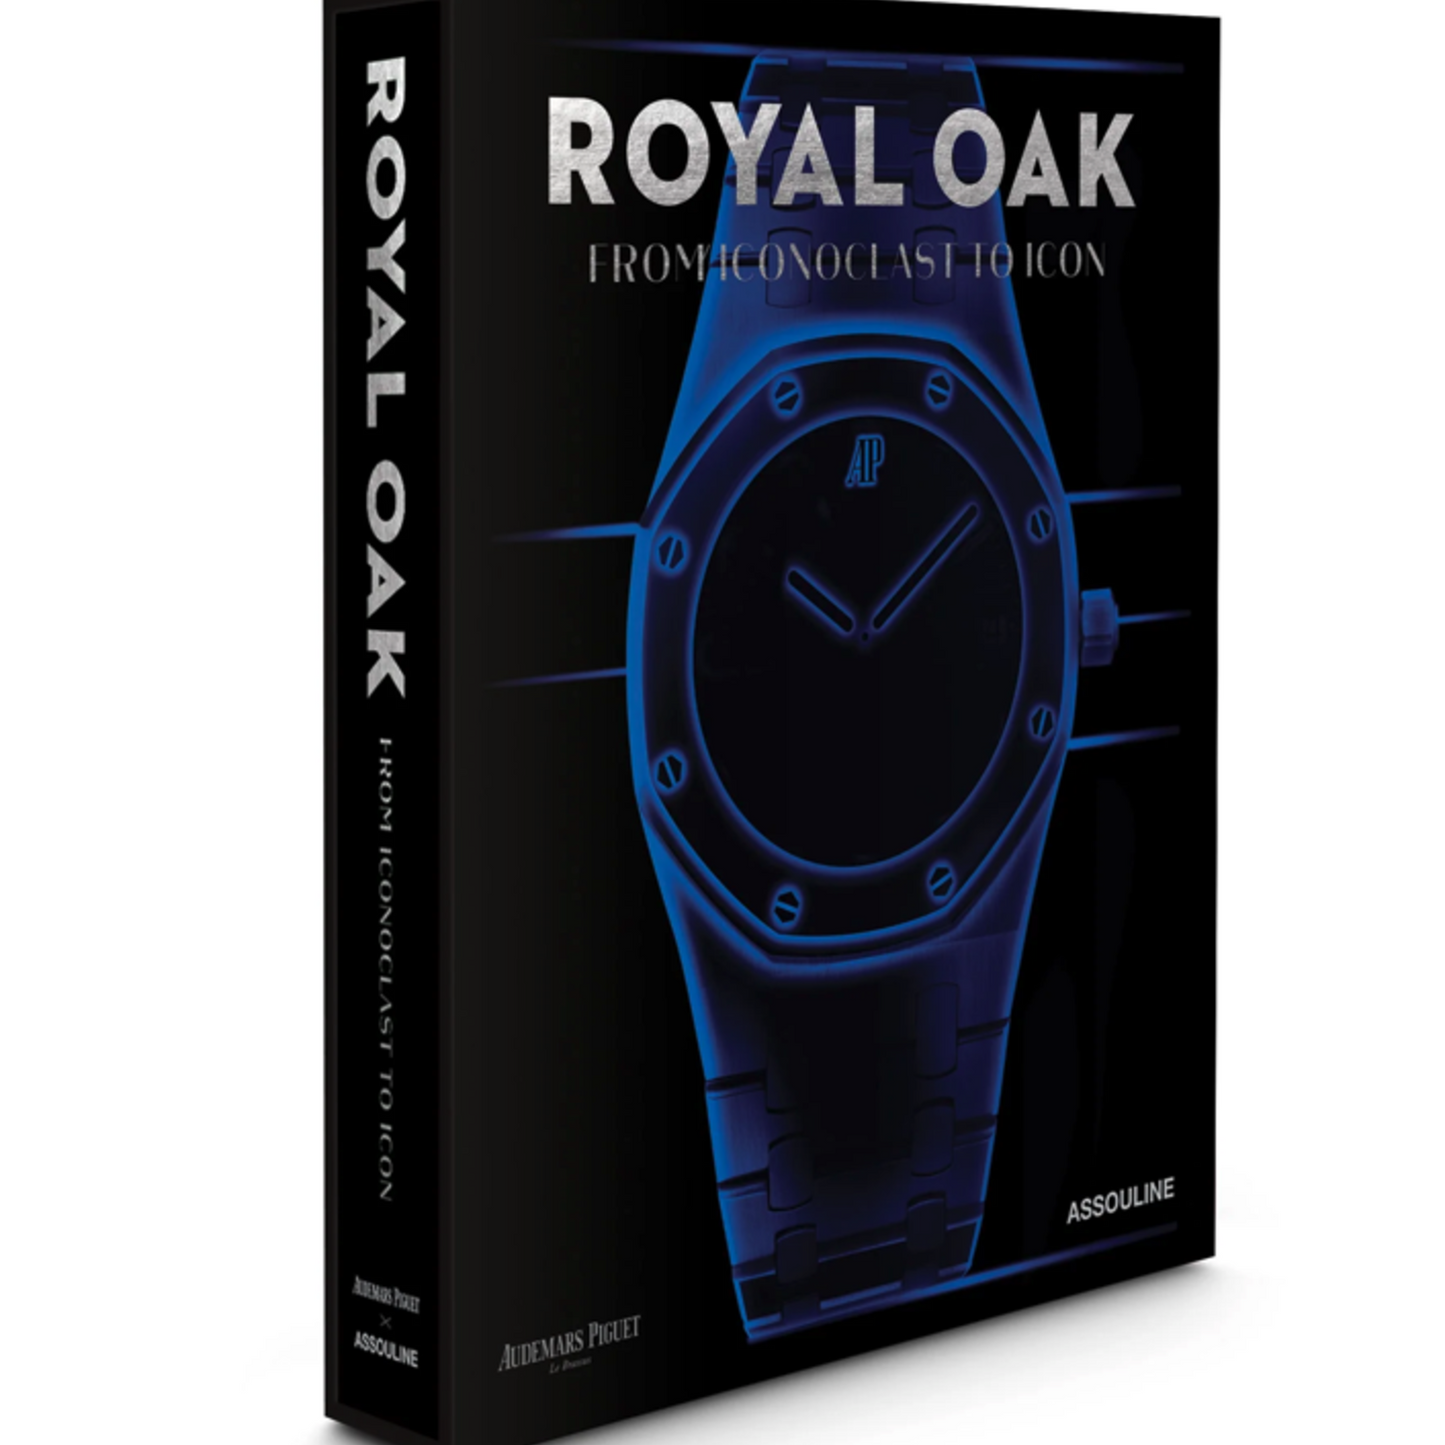 Assouline - Royal Oak: From Iconoclast to Icon